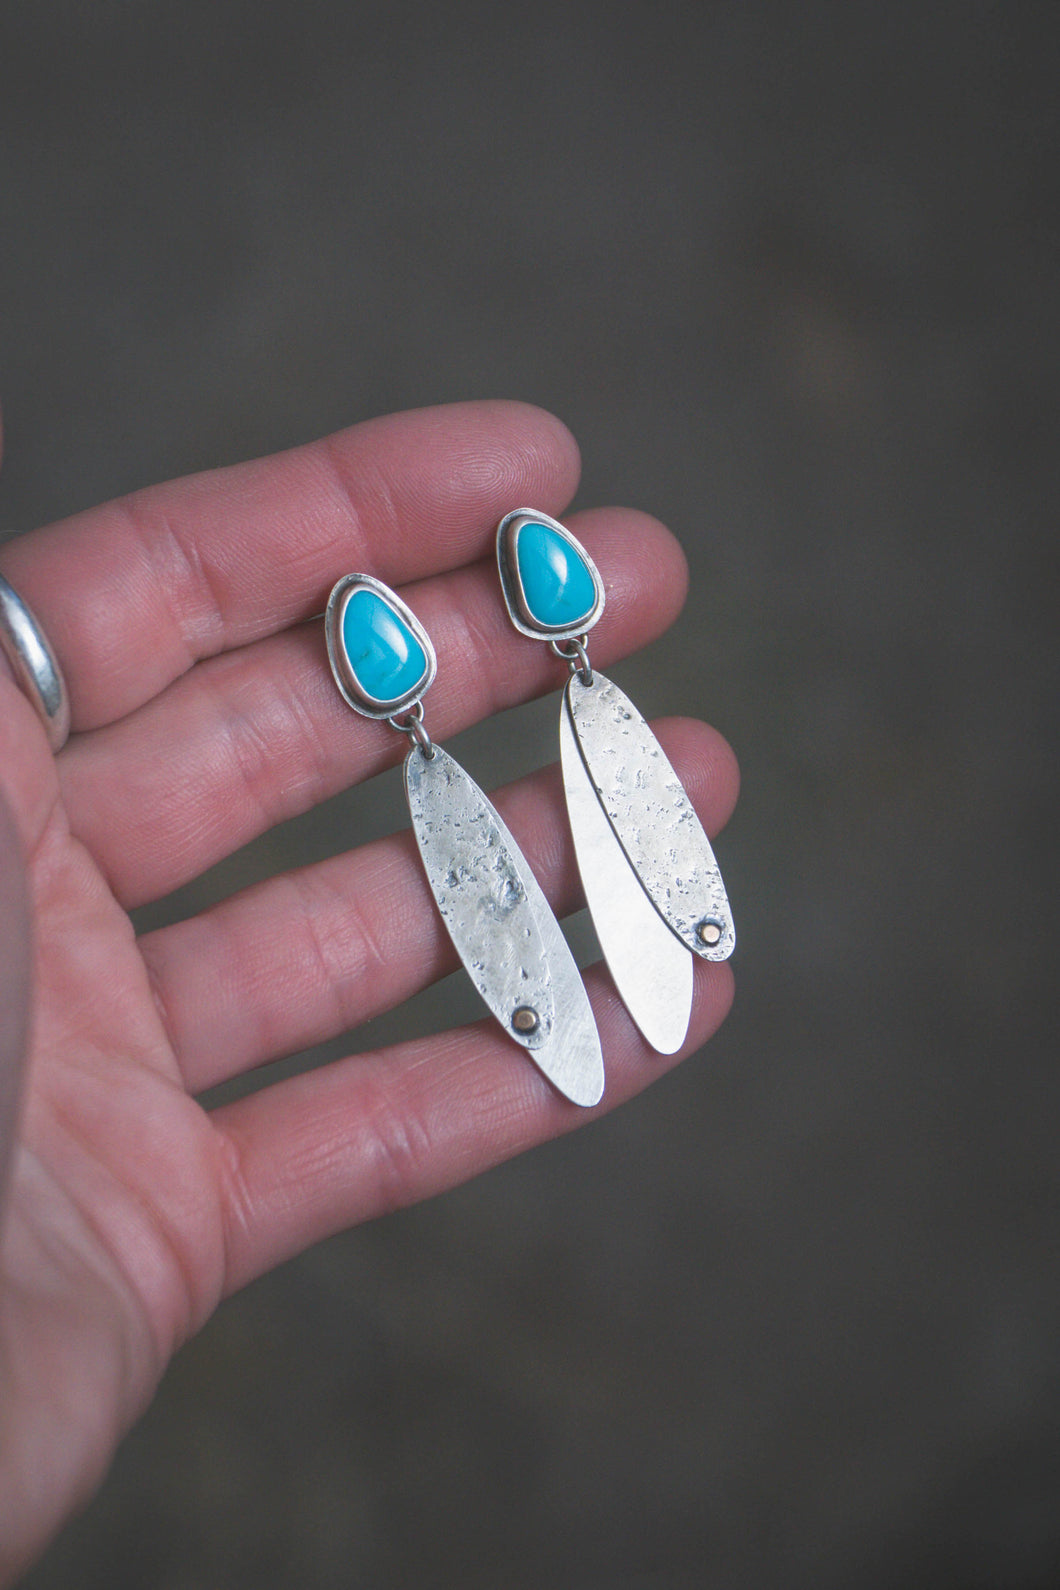 Sounds of Spring Stud Earrings #3 | Turquoise + Sterling Silver + 10K Gold